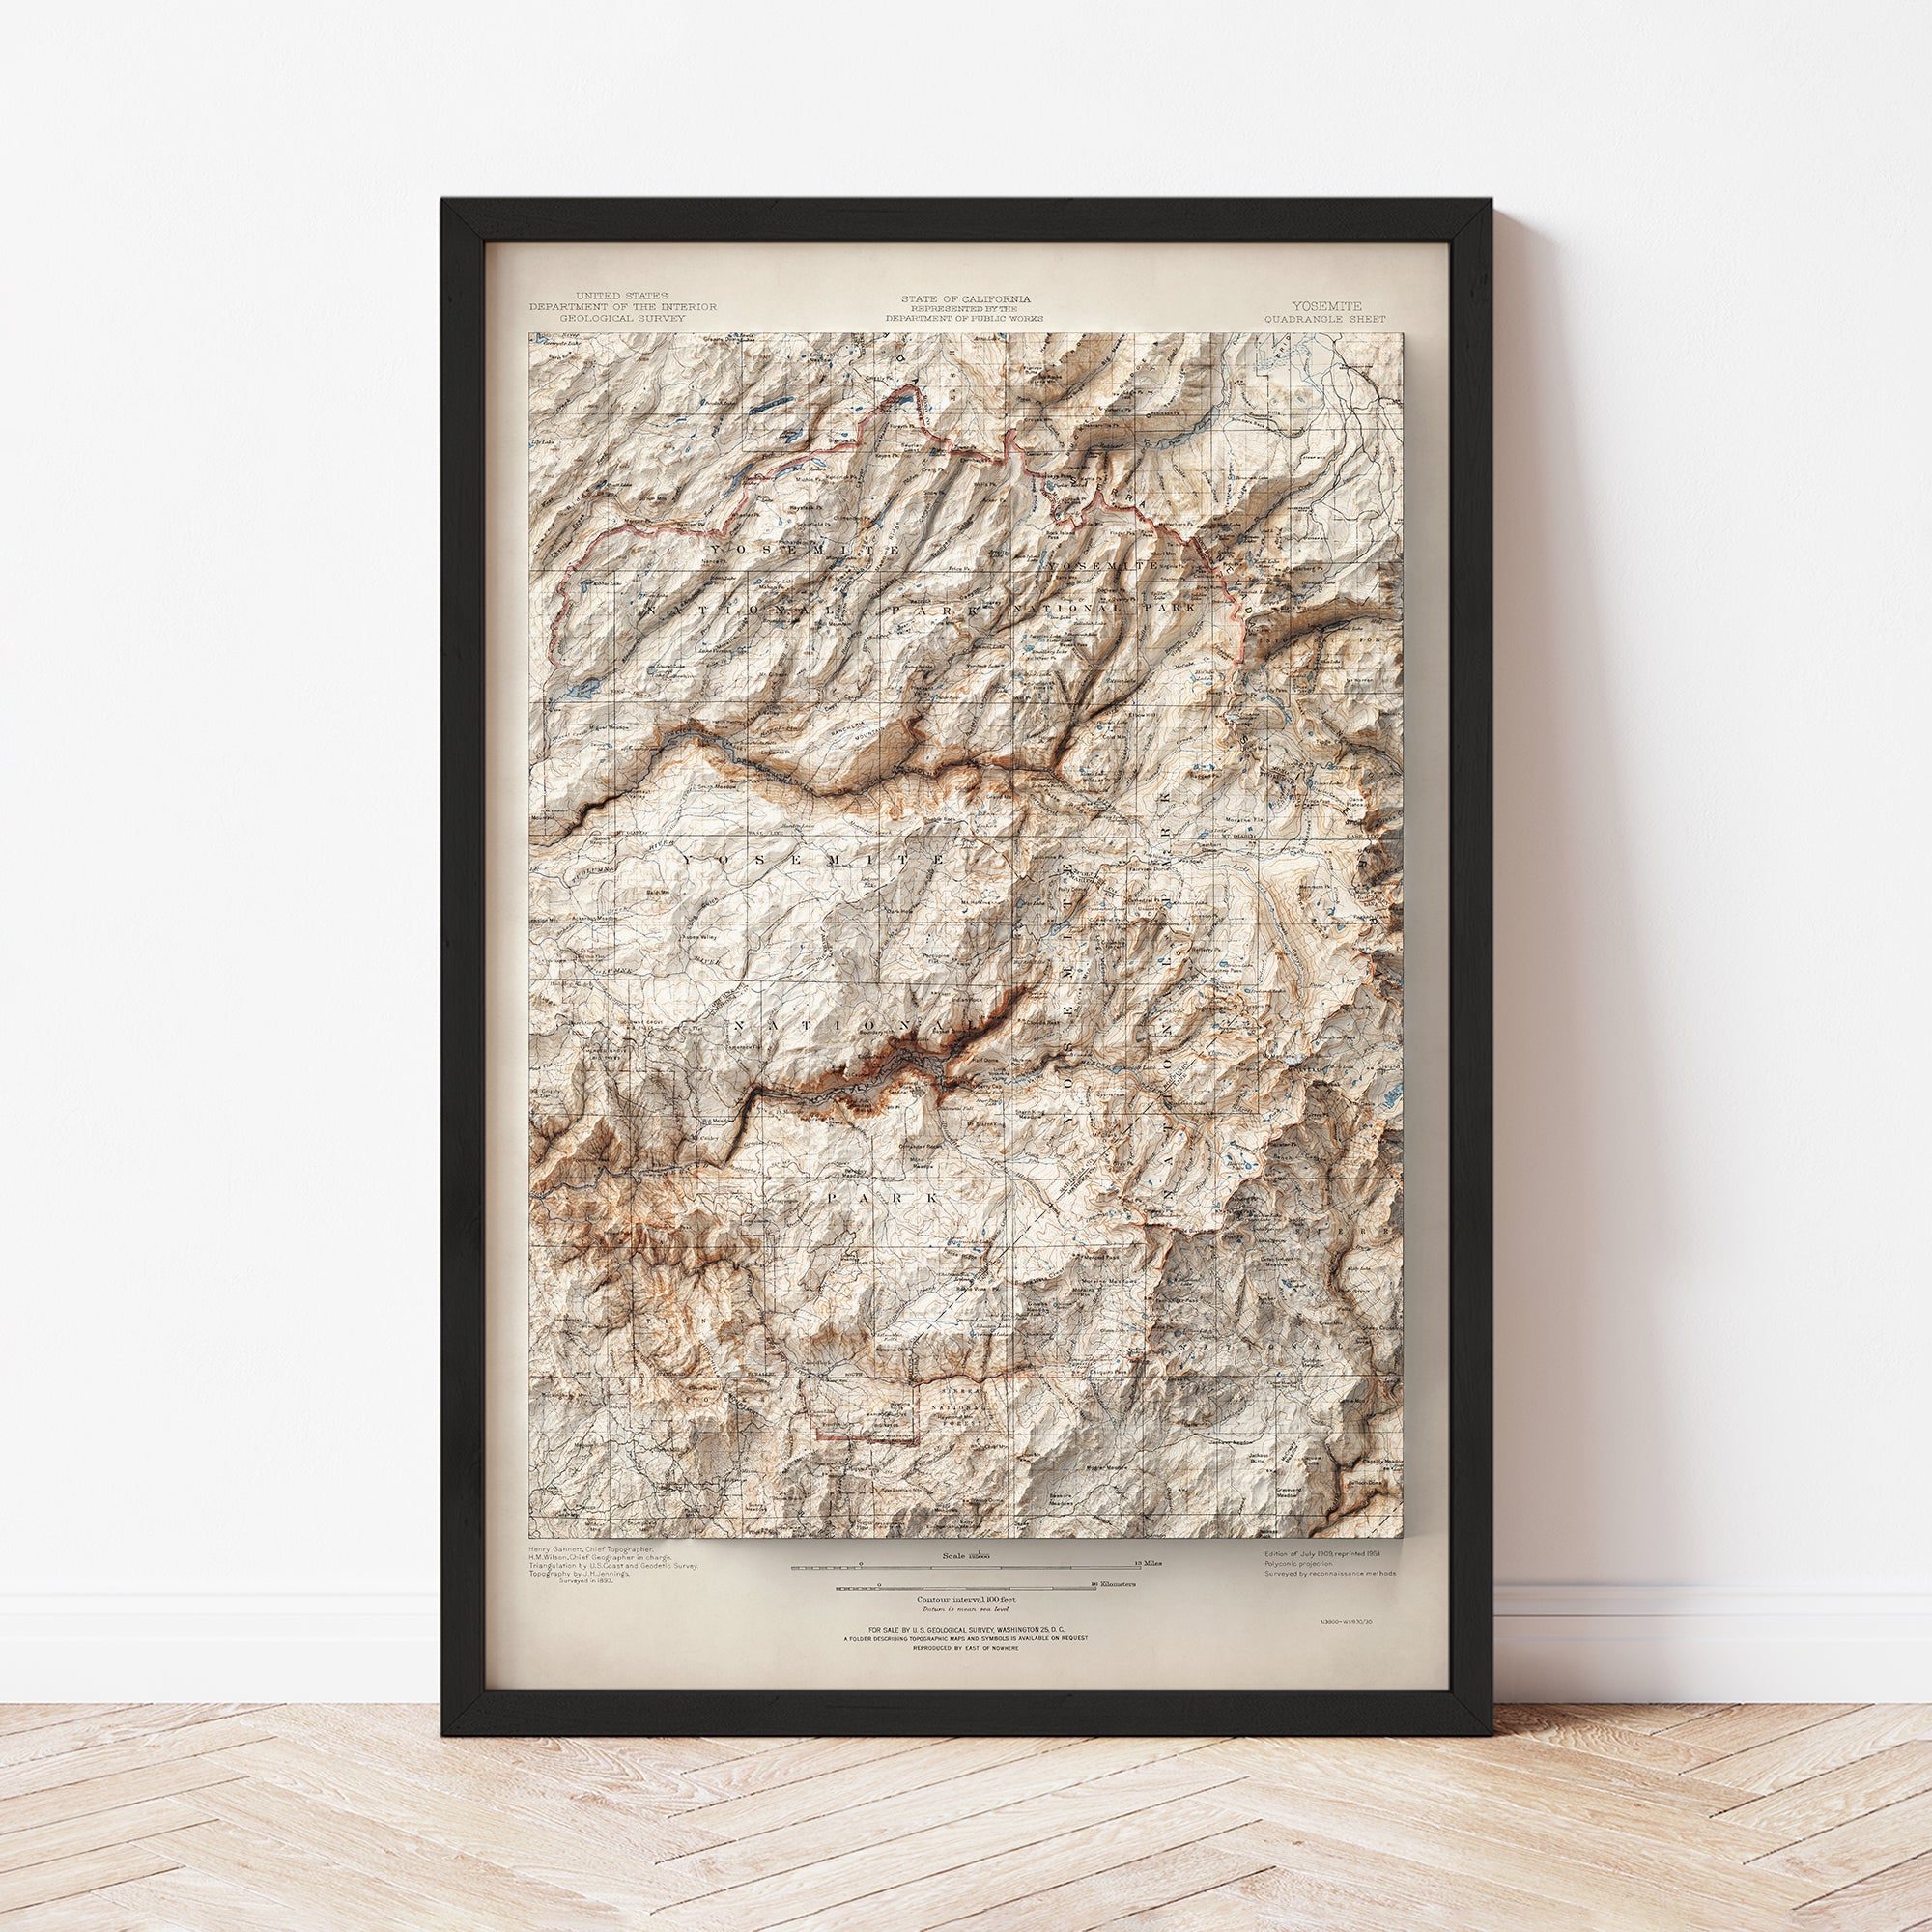 Yosemite National Park, CA - Vintage Shaded Relief Map (1909)